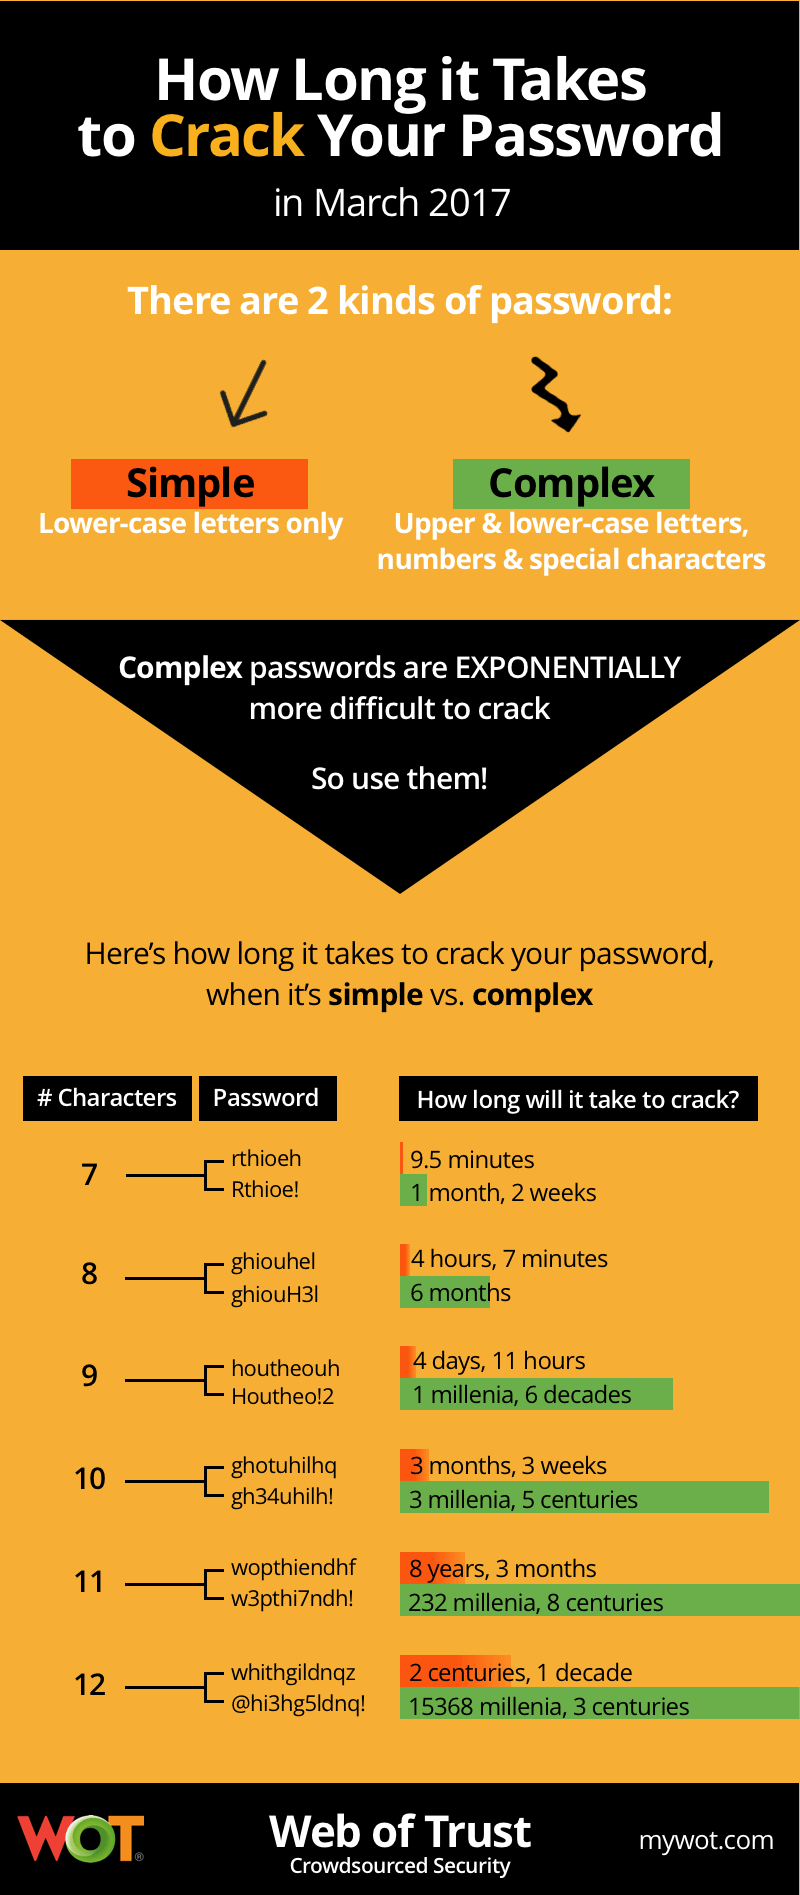 How Long it takes to crack your password